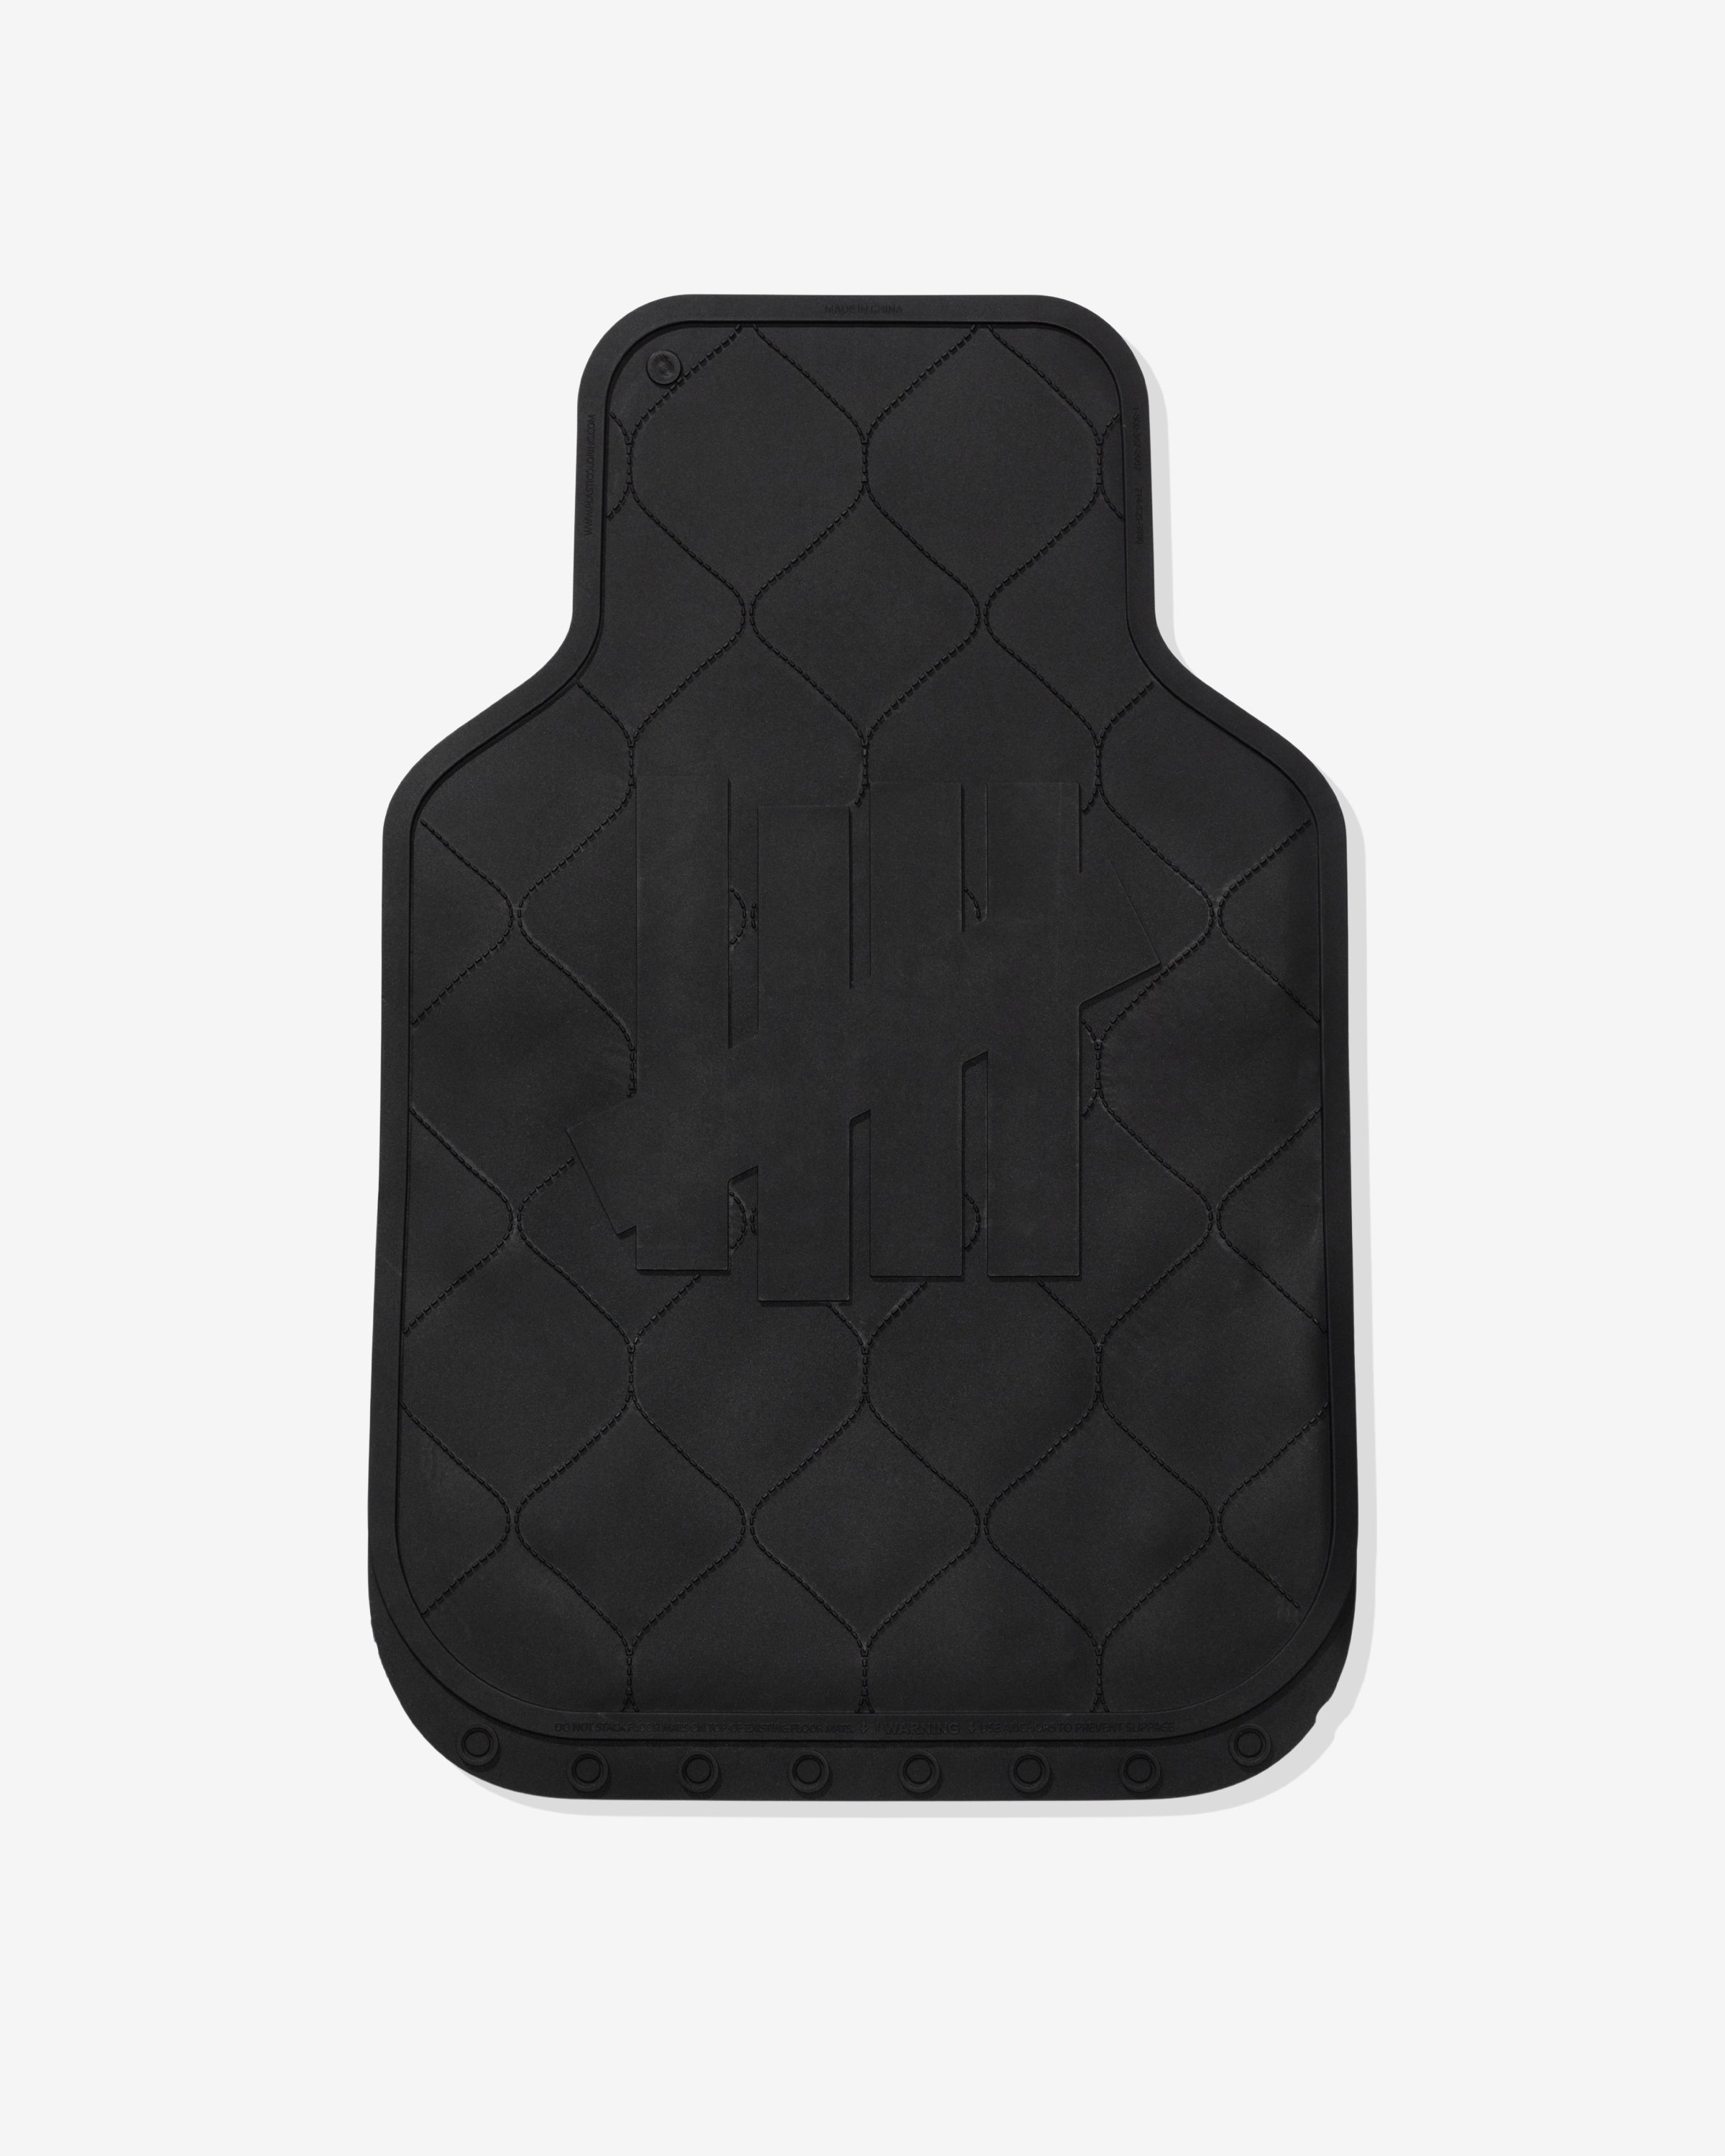 UNDFEFEATED QUILTED CAR MATS - BLACK